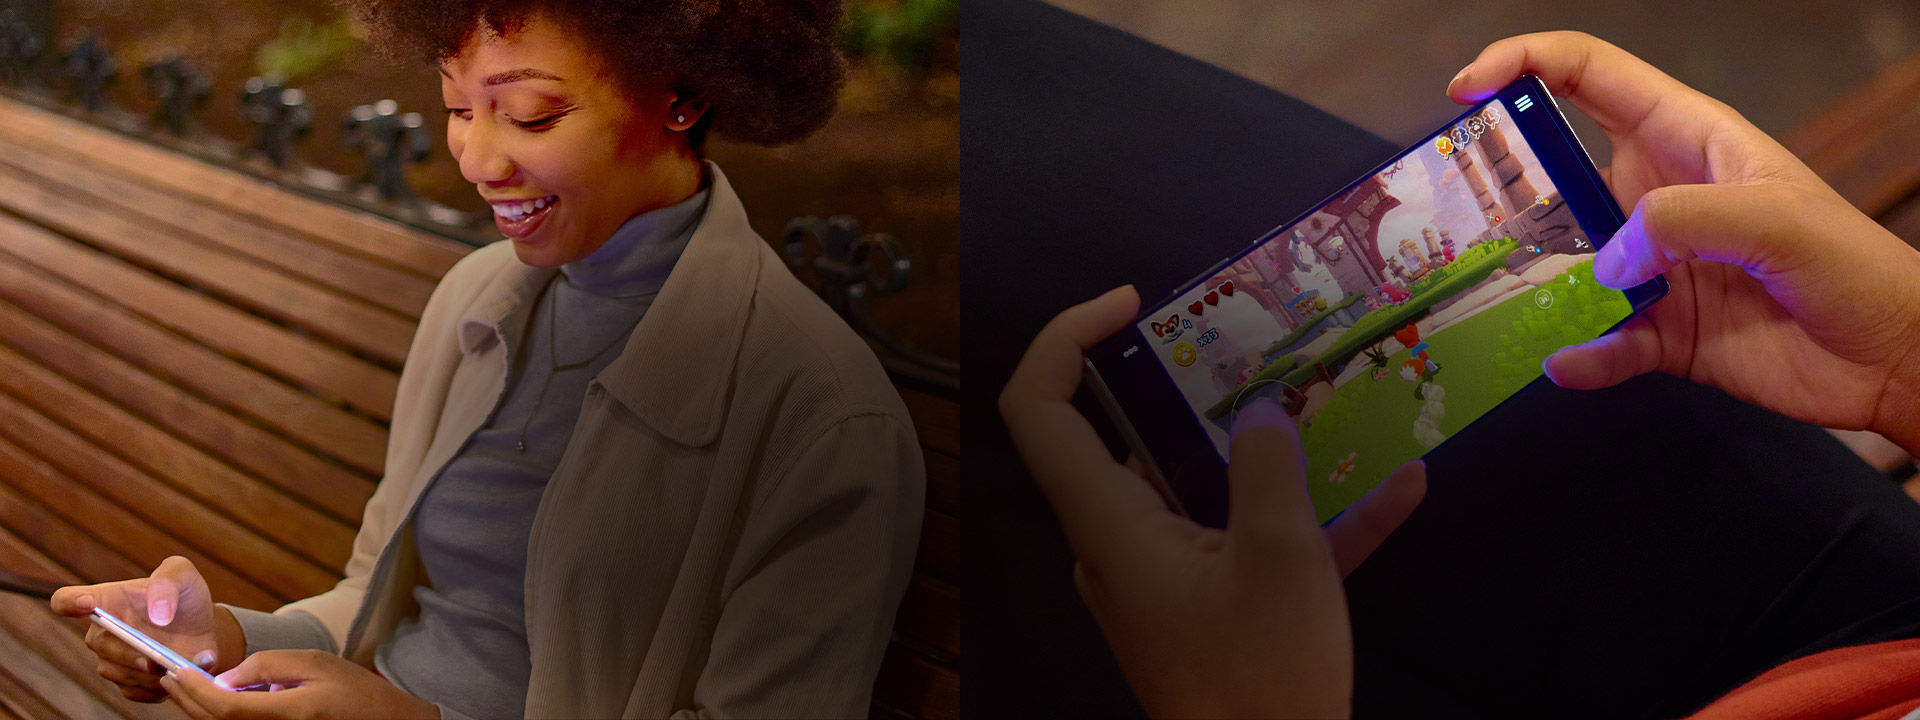 A woman on a bench plays Super Lucky's Tale on her phone using touch controls